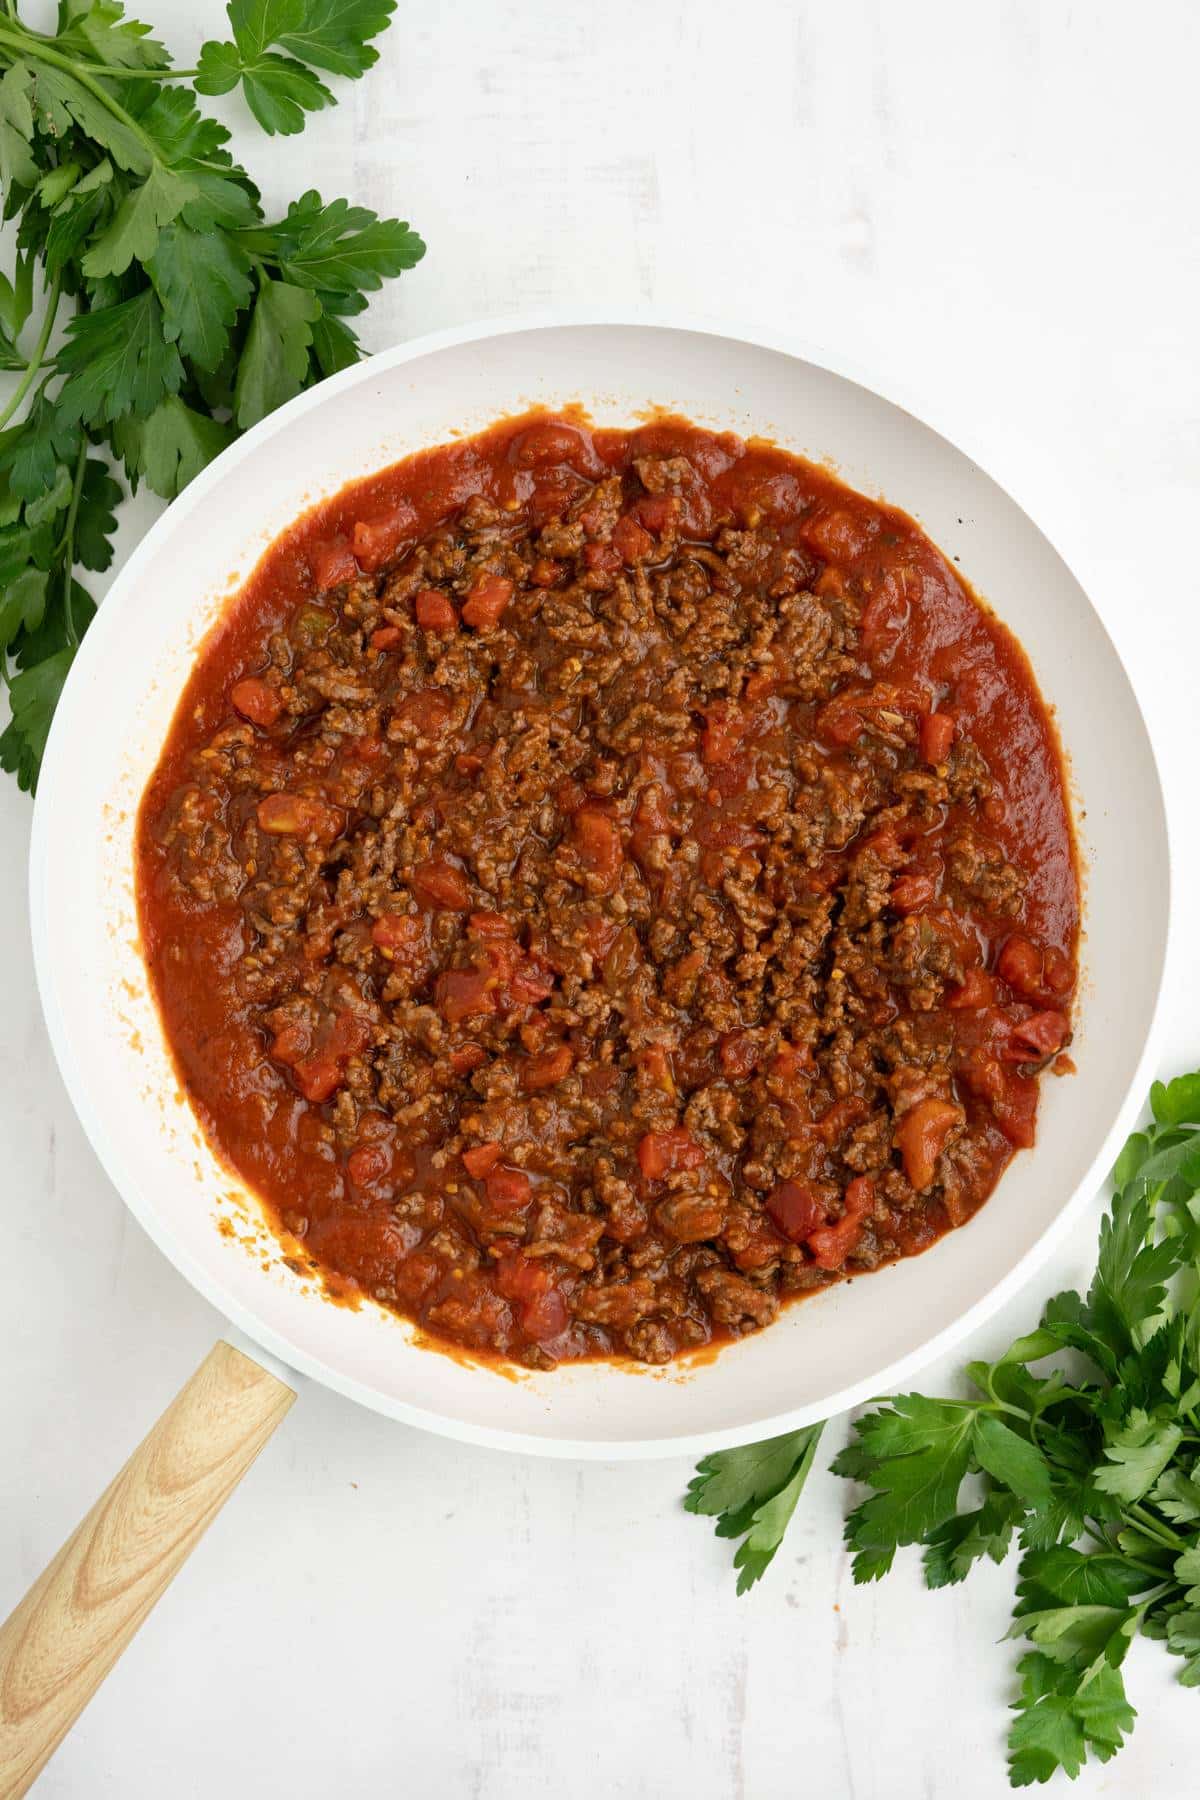 Ground beef cooked in pasta sauce.